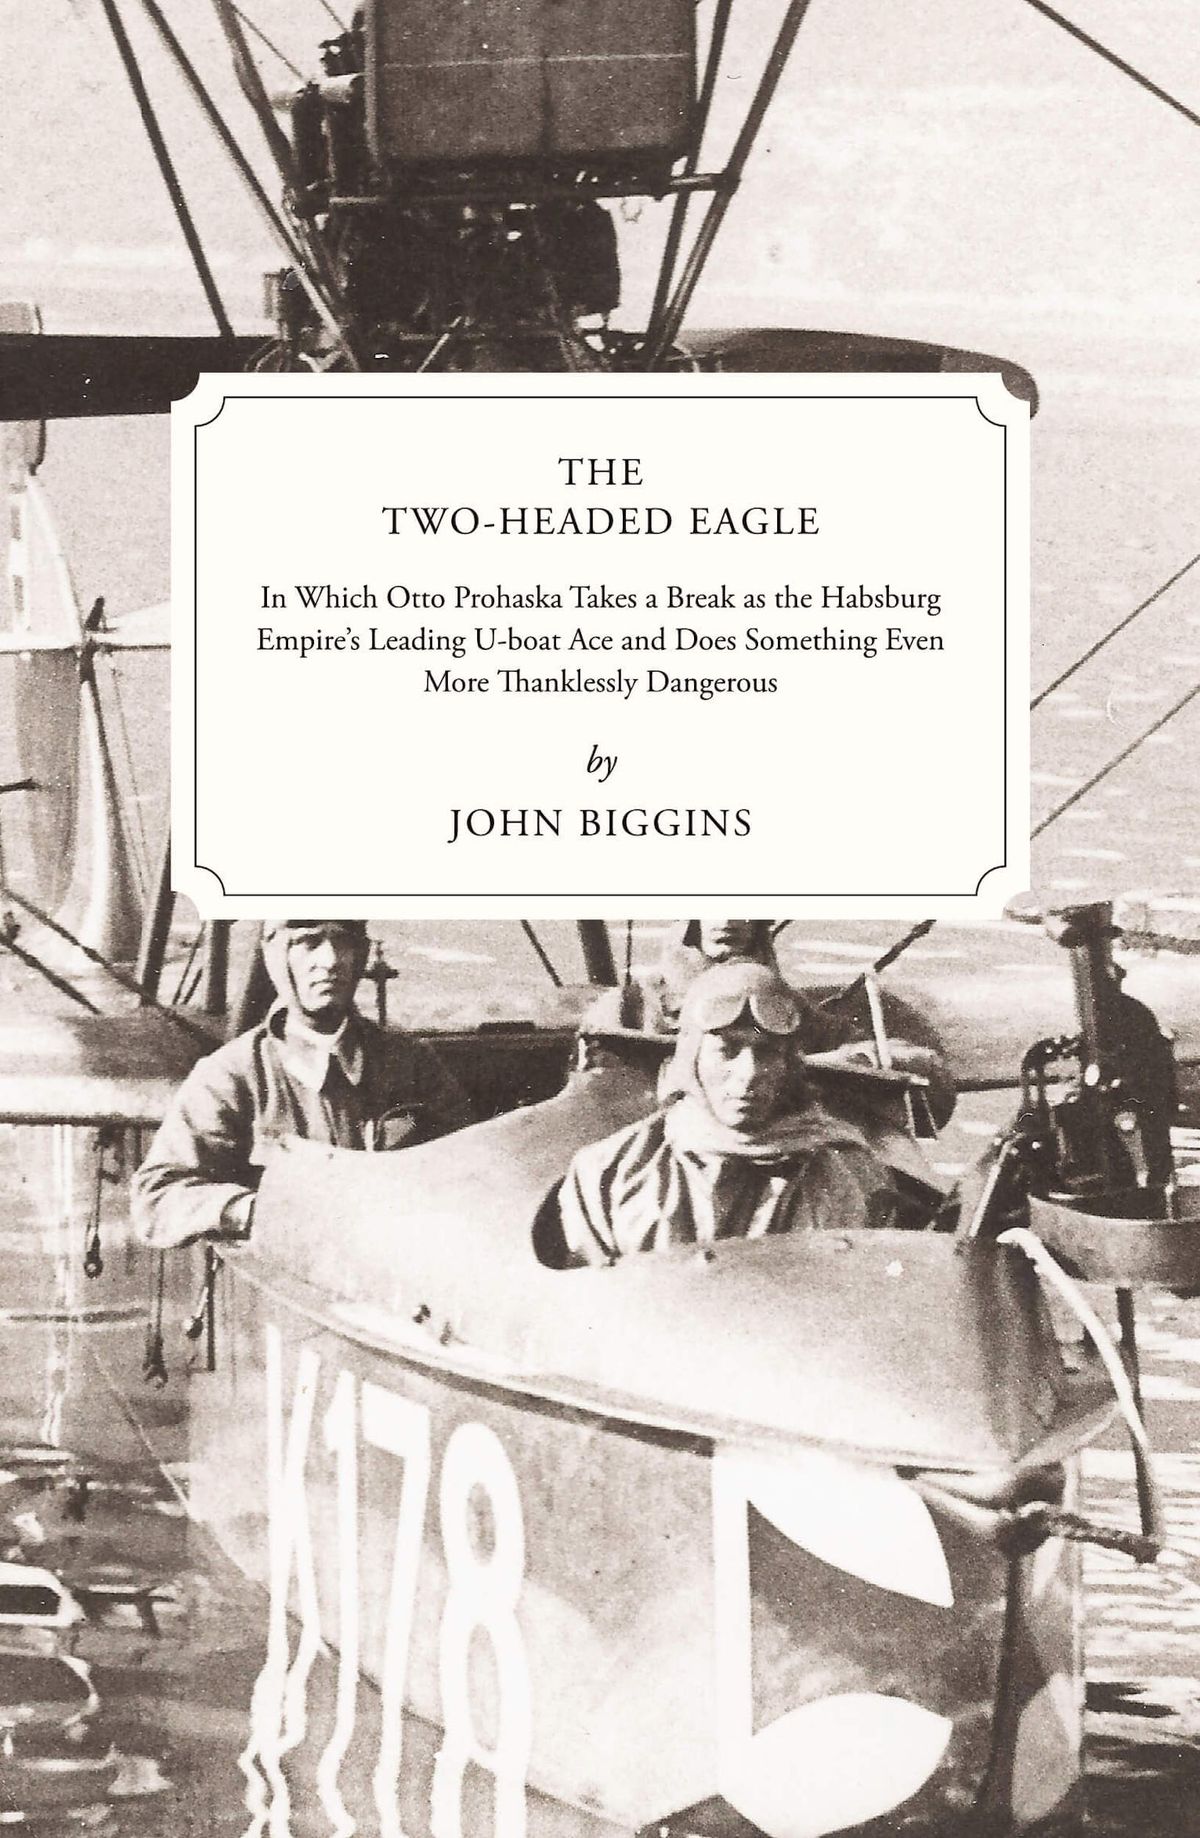 The Two-Headed Eagle by John Biggins